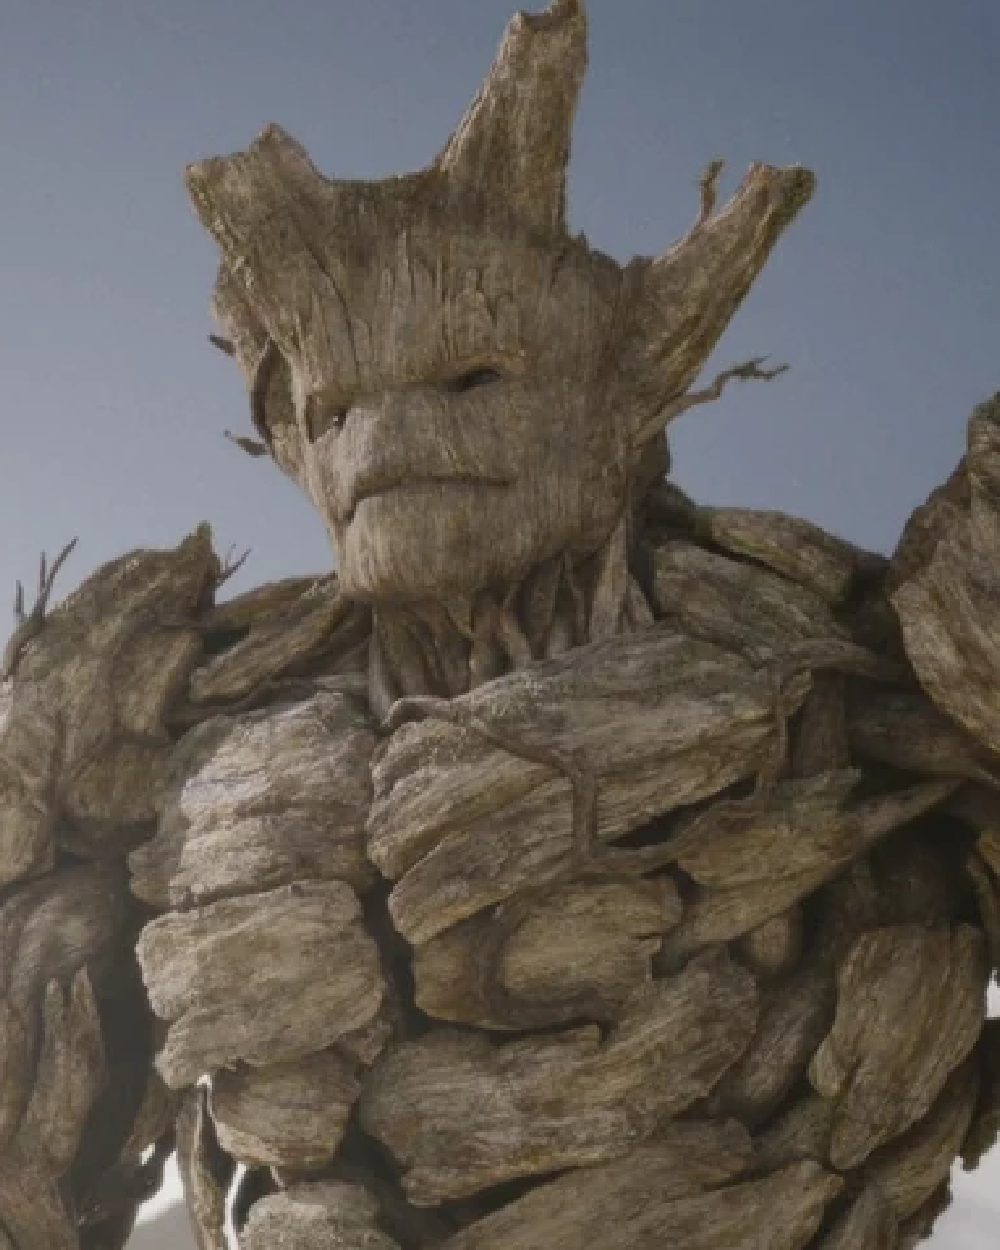 https://static.wikia.nocookie.net/marvelcinematicuniverse/images/3/3f/Groot_Perfil.png/revision/latest?cb=20230706231043&path-prefix=es